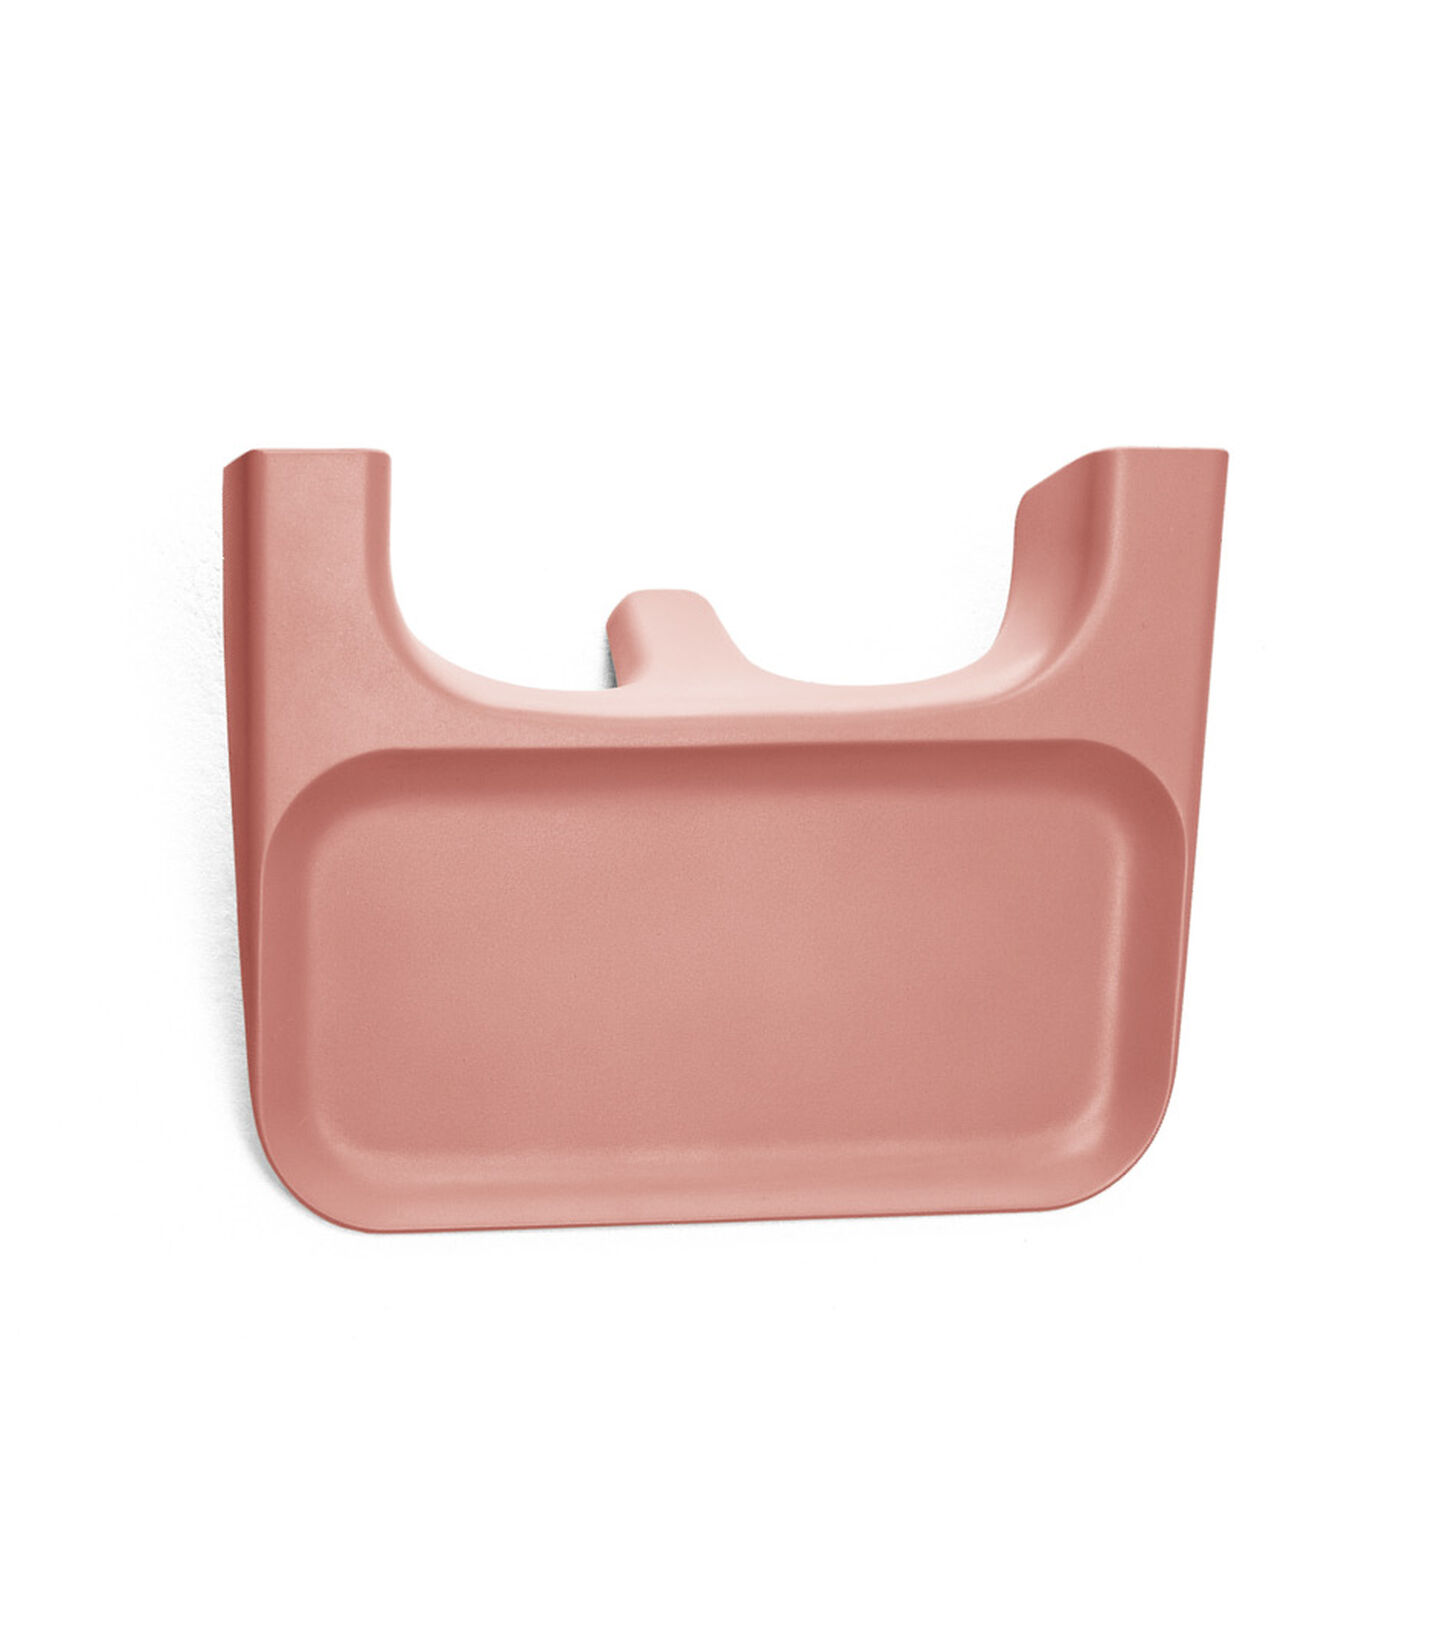 Stokke® Clikk™ Tray Sunny Coral, Sunny Coral, mainview view 1